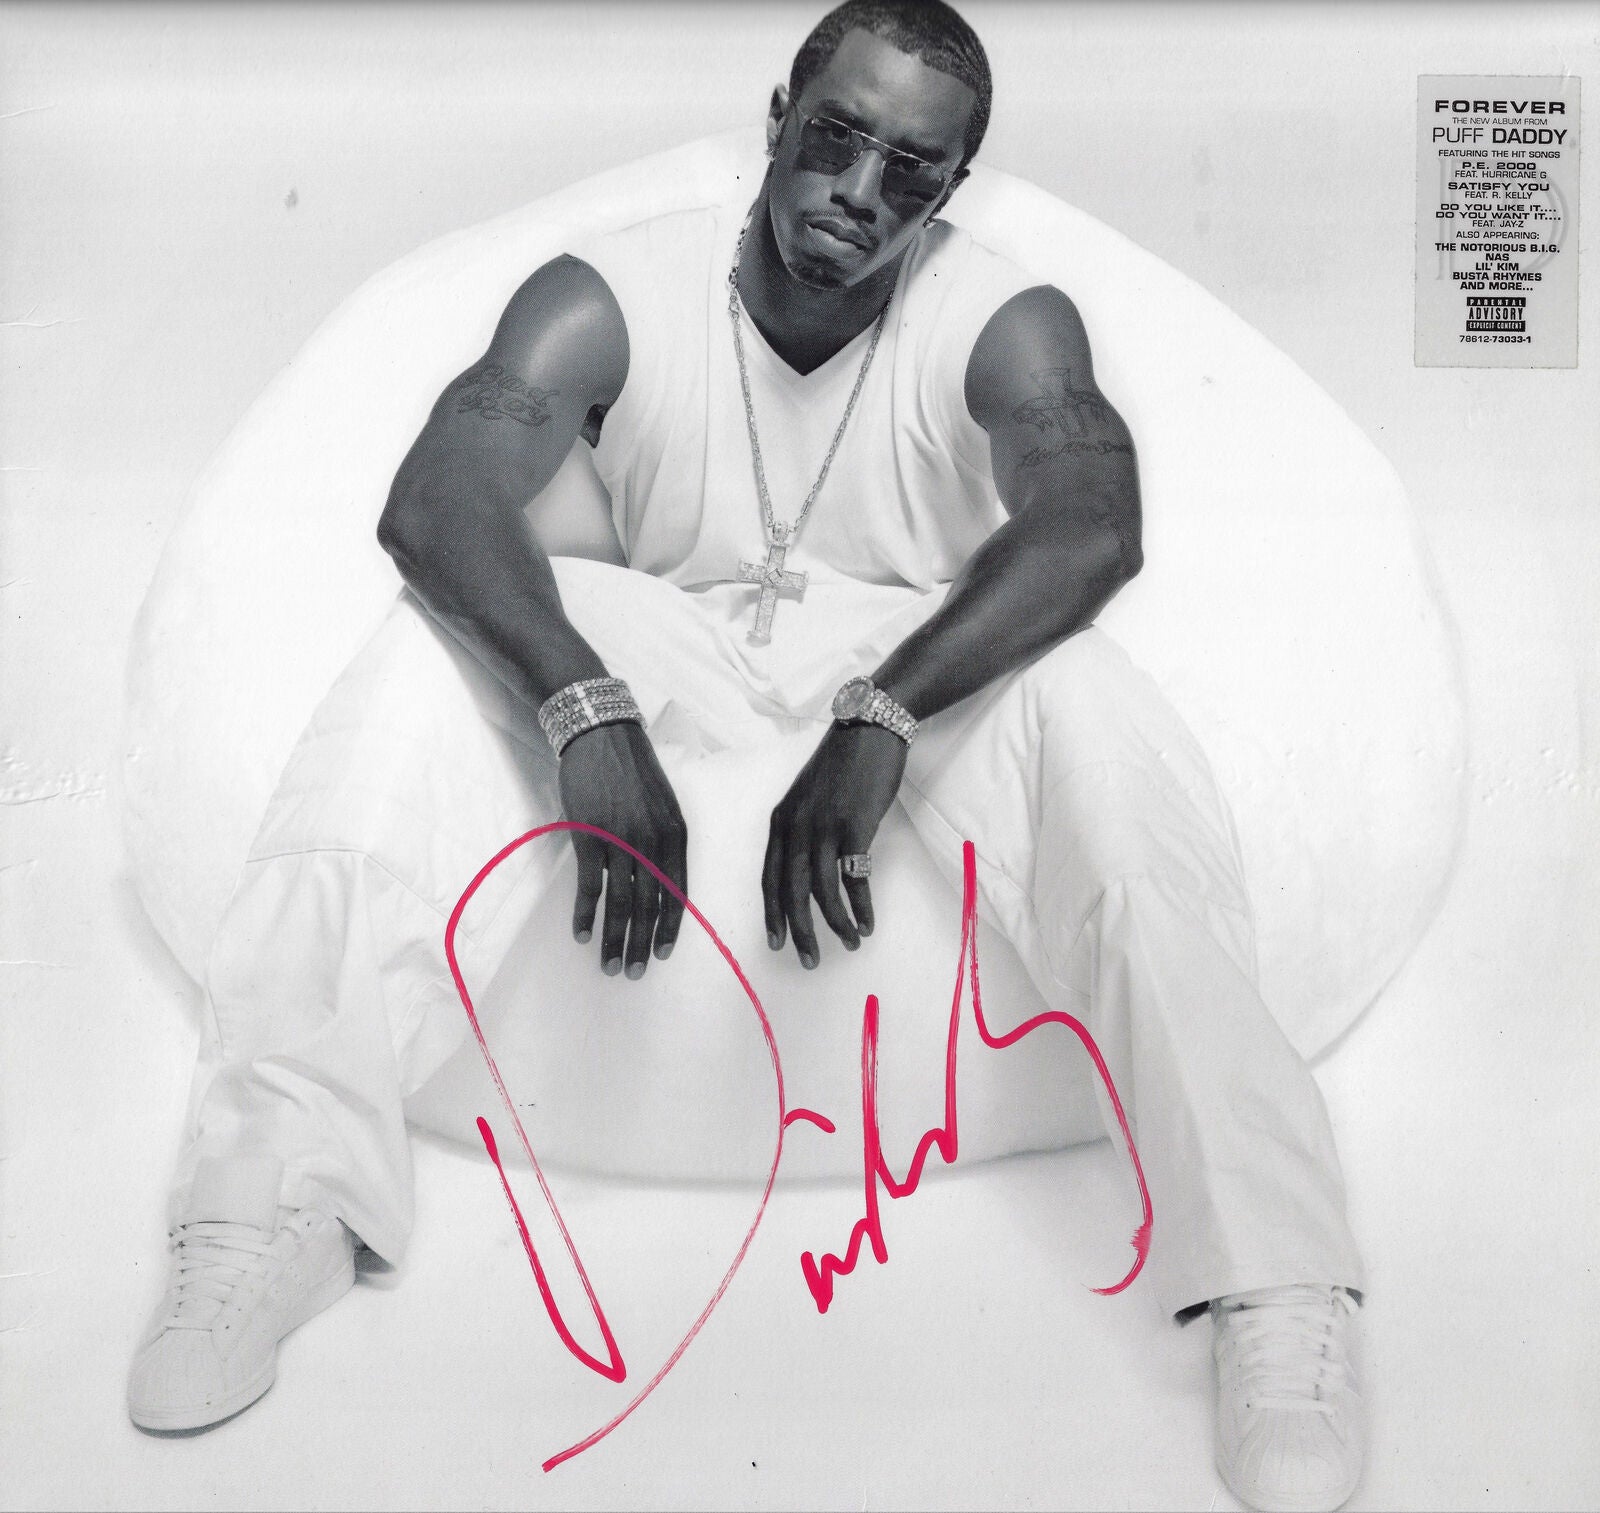 P DIDDY SEAN COMBS SIGNED FOREVER ALBUM VINYL BAD BOY RECORDS (AFTAL COA)